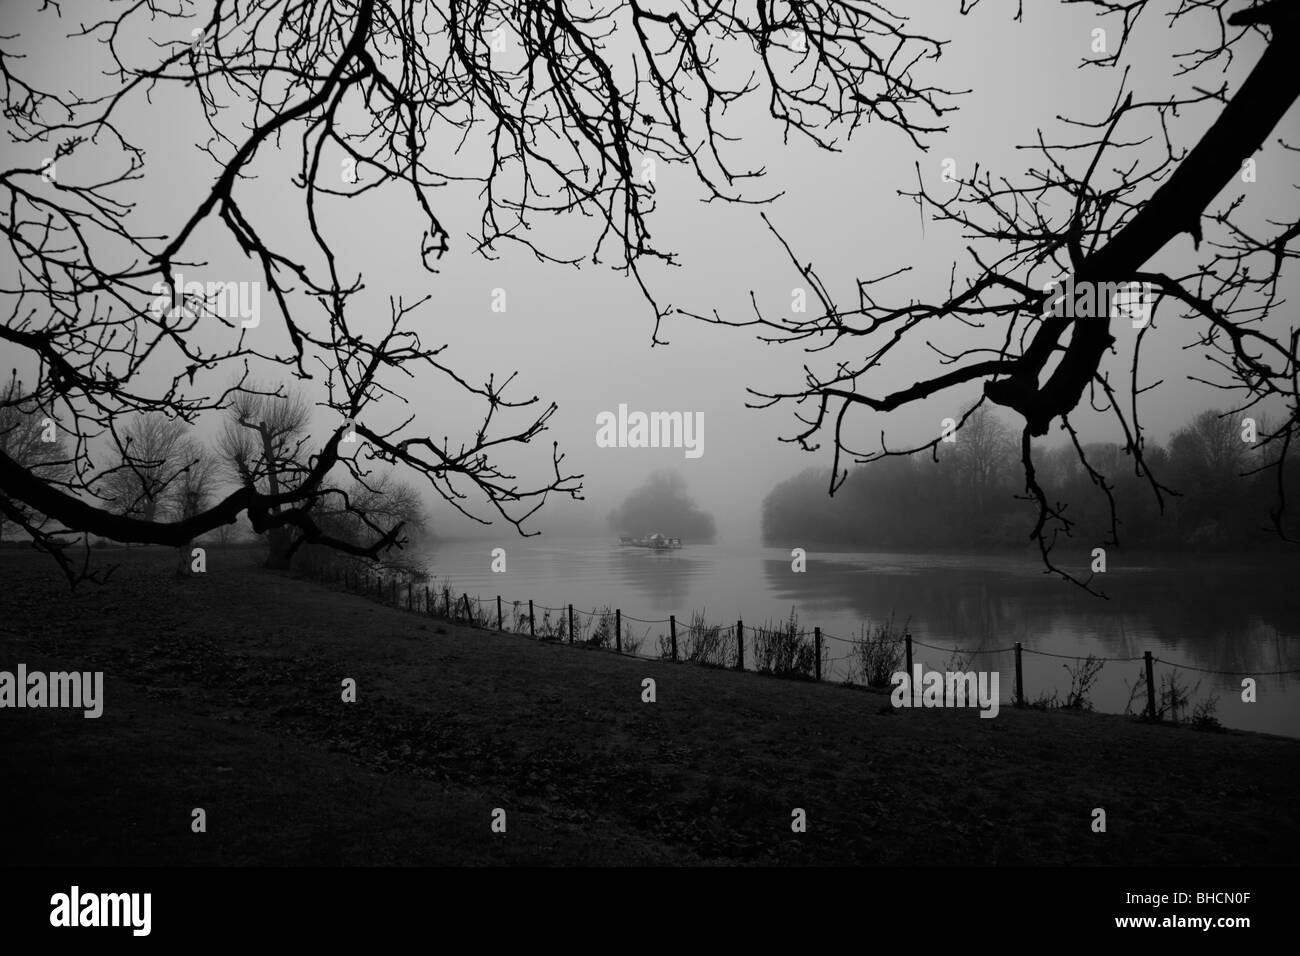 Looking out from Buccleugh Gardens to a misty Glovers Island in the middle of a River Thames, Petersham, London, UK Stock Photo